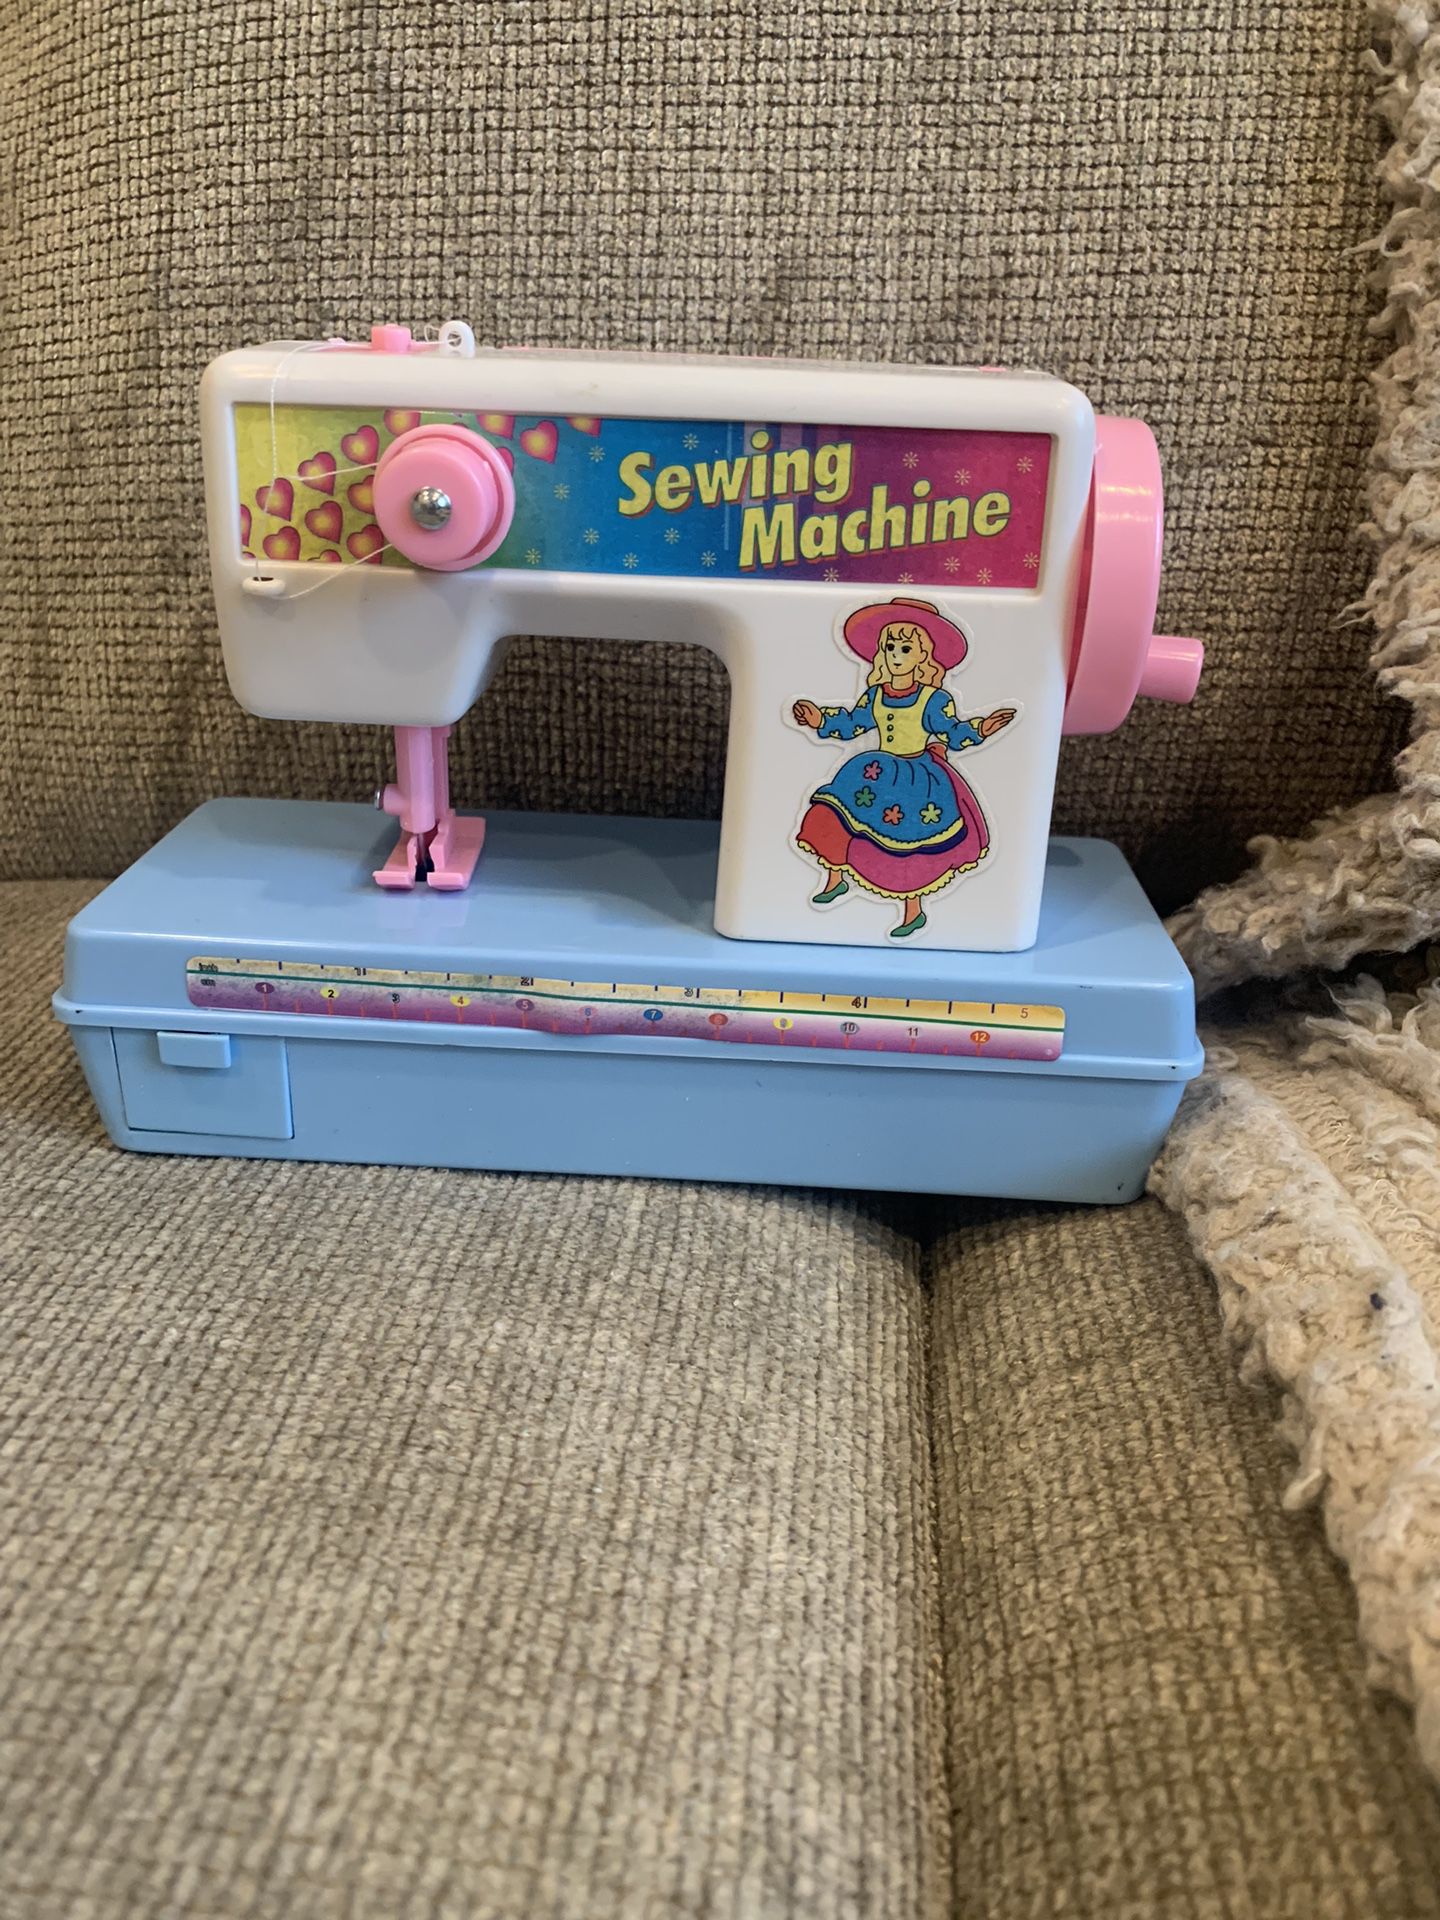 Manual Sewing Machine For Kids, Perfect For Birthday Present. 